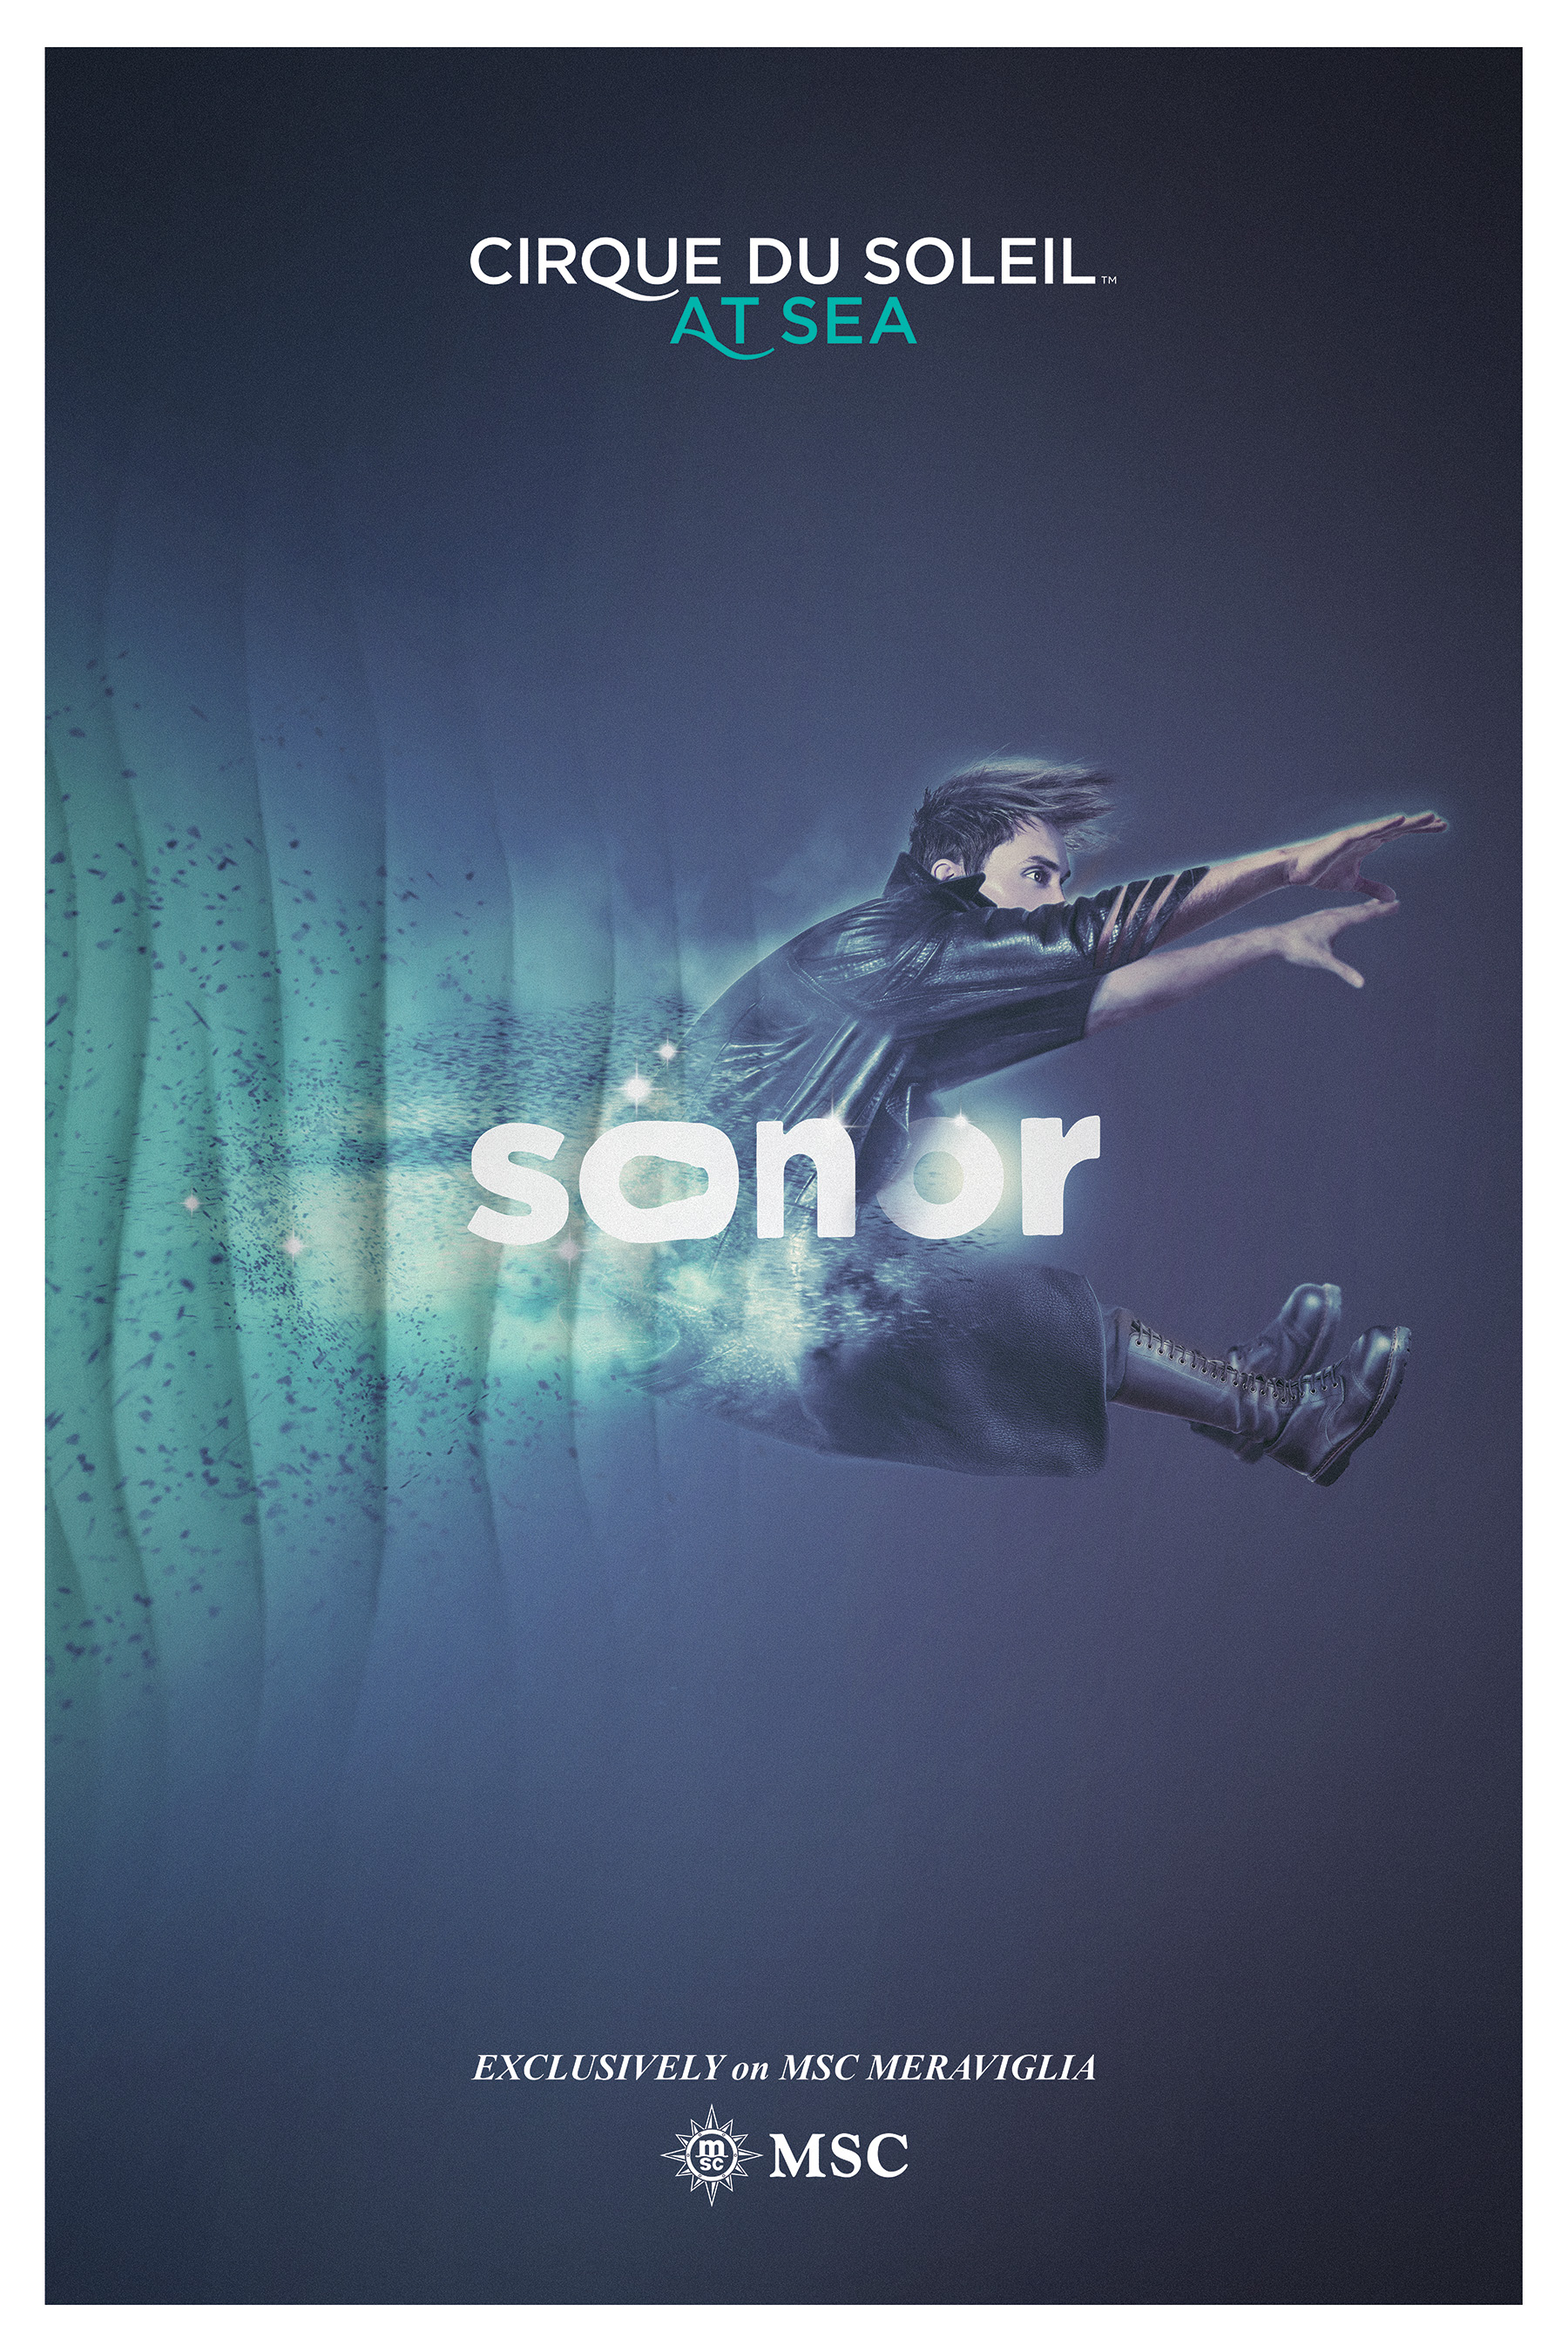 SONOR takes guests on an auditory adventure with dancers, acrobats and characters, all moving to the rhythm.